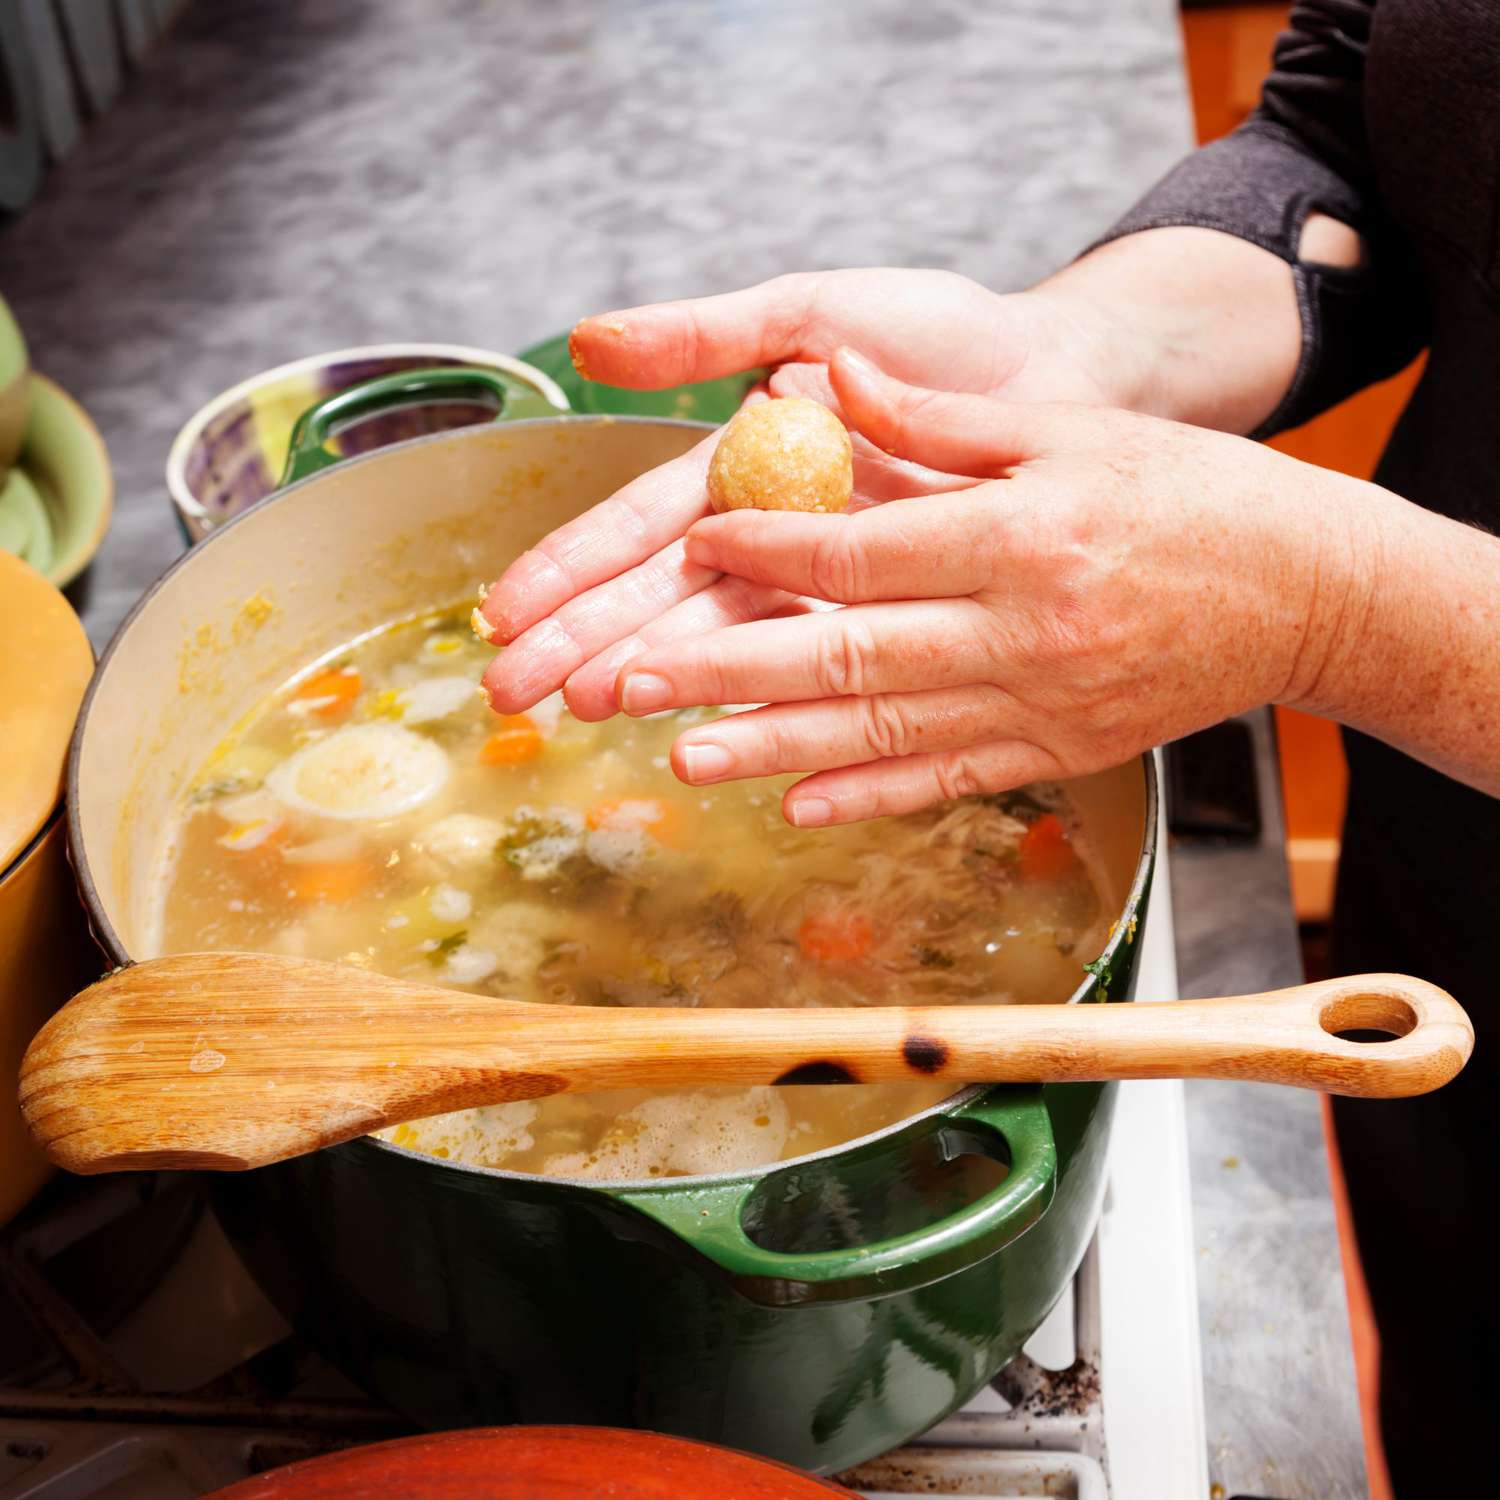 Hands forming a matzoh ball over a pot of soup